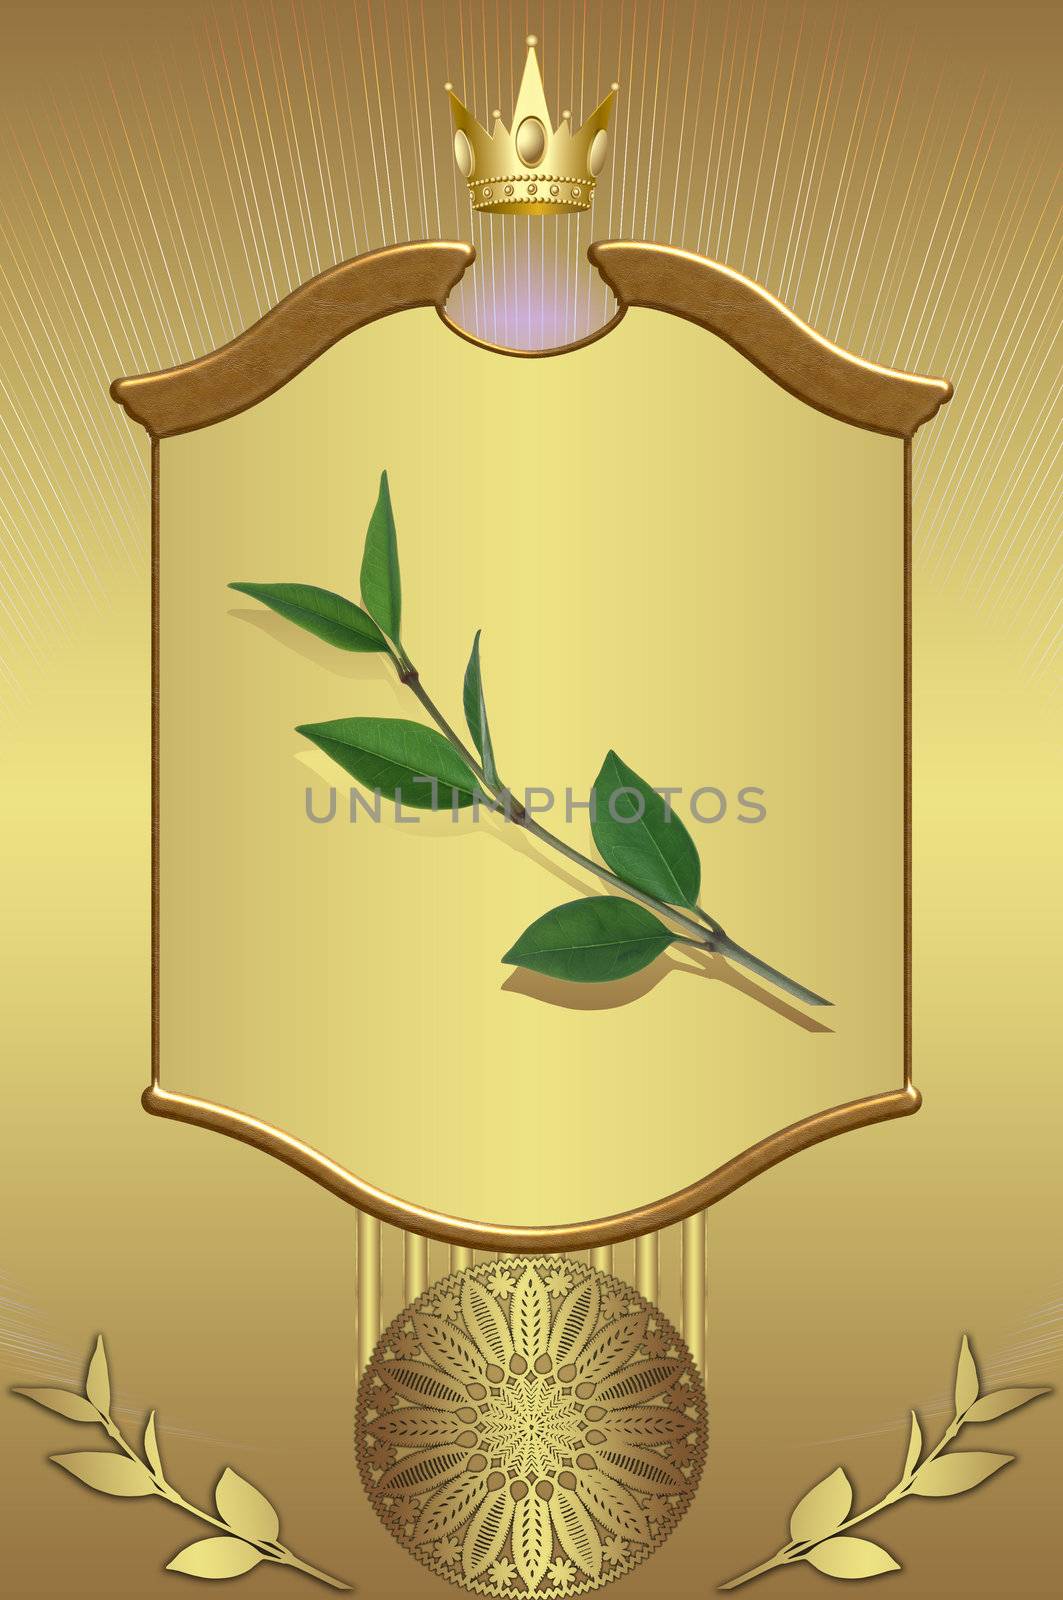 Golden background with golden elements and green branch